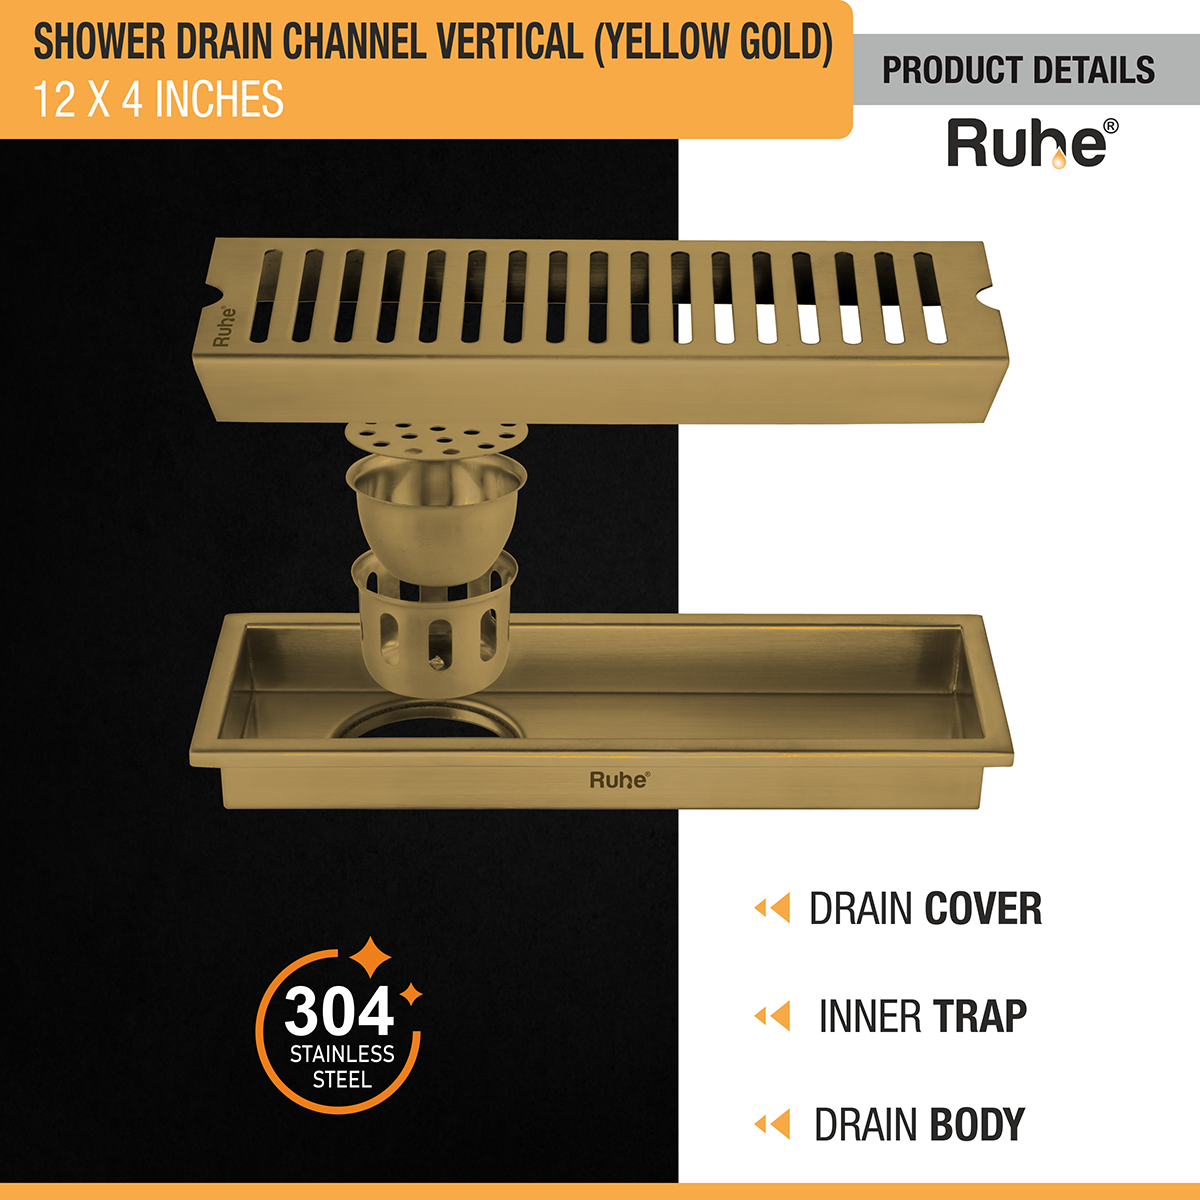 Vertical Shower Drain Channel (12 x 4 Inches) YELLOW GOLD product details